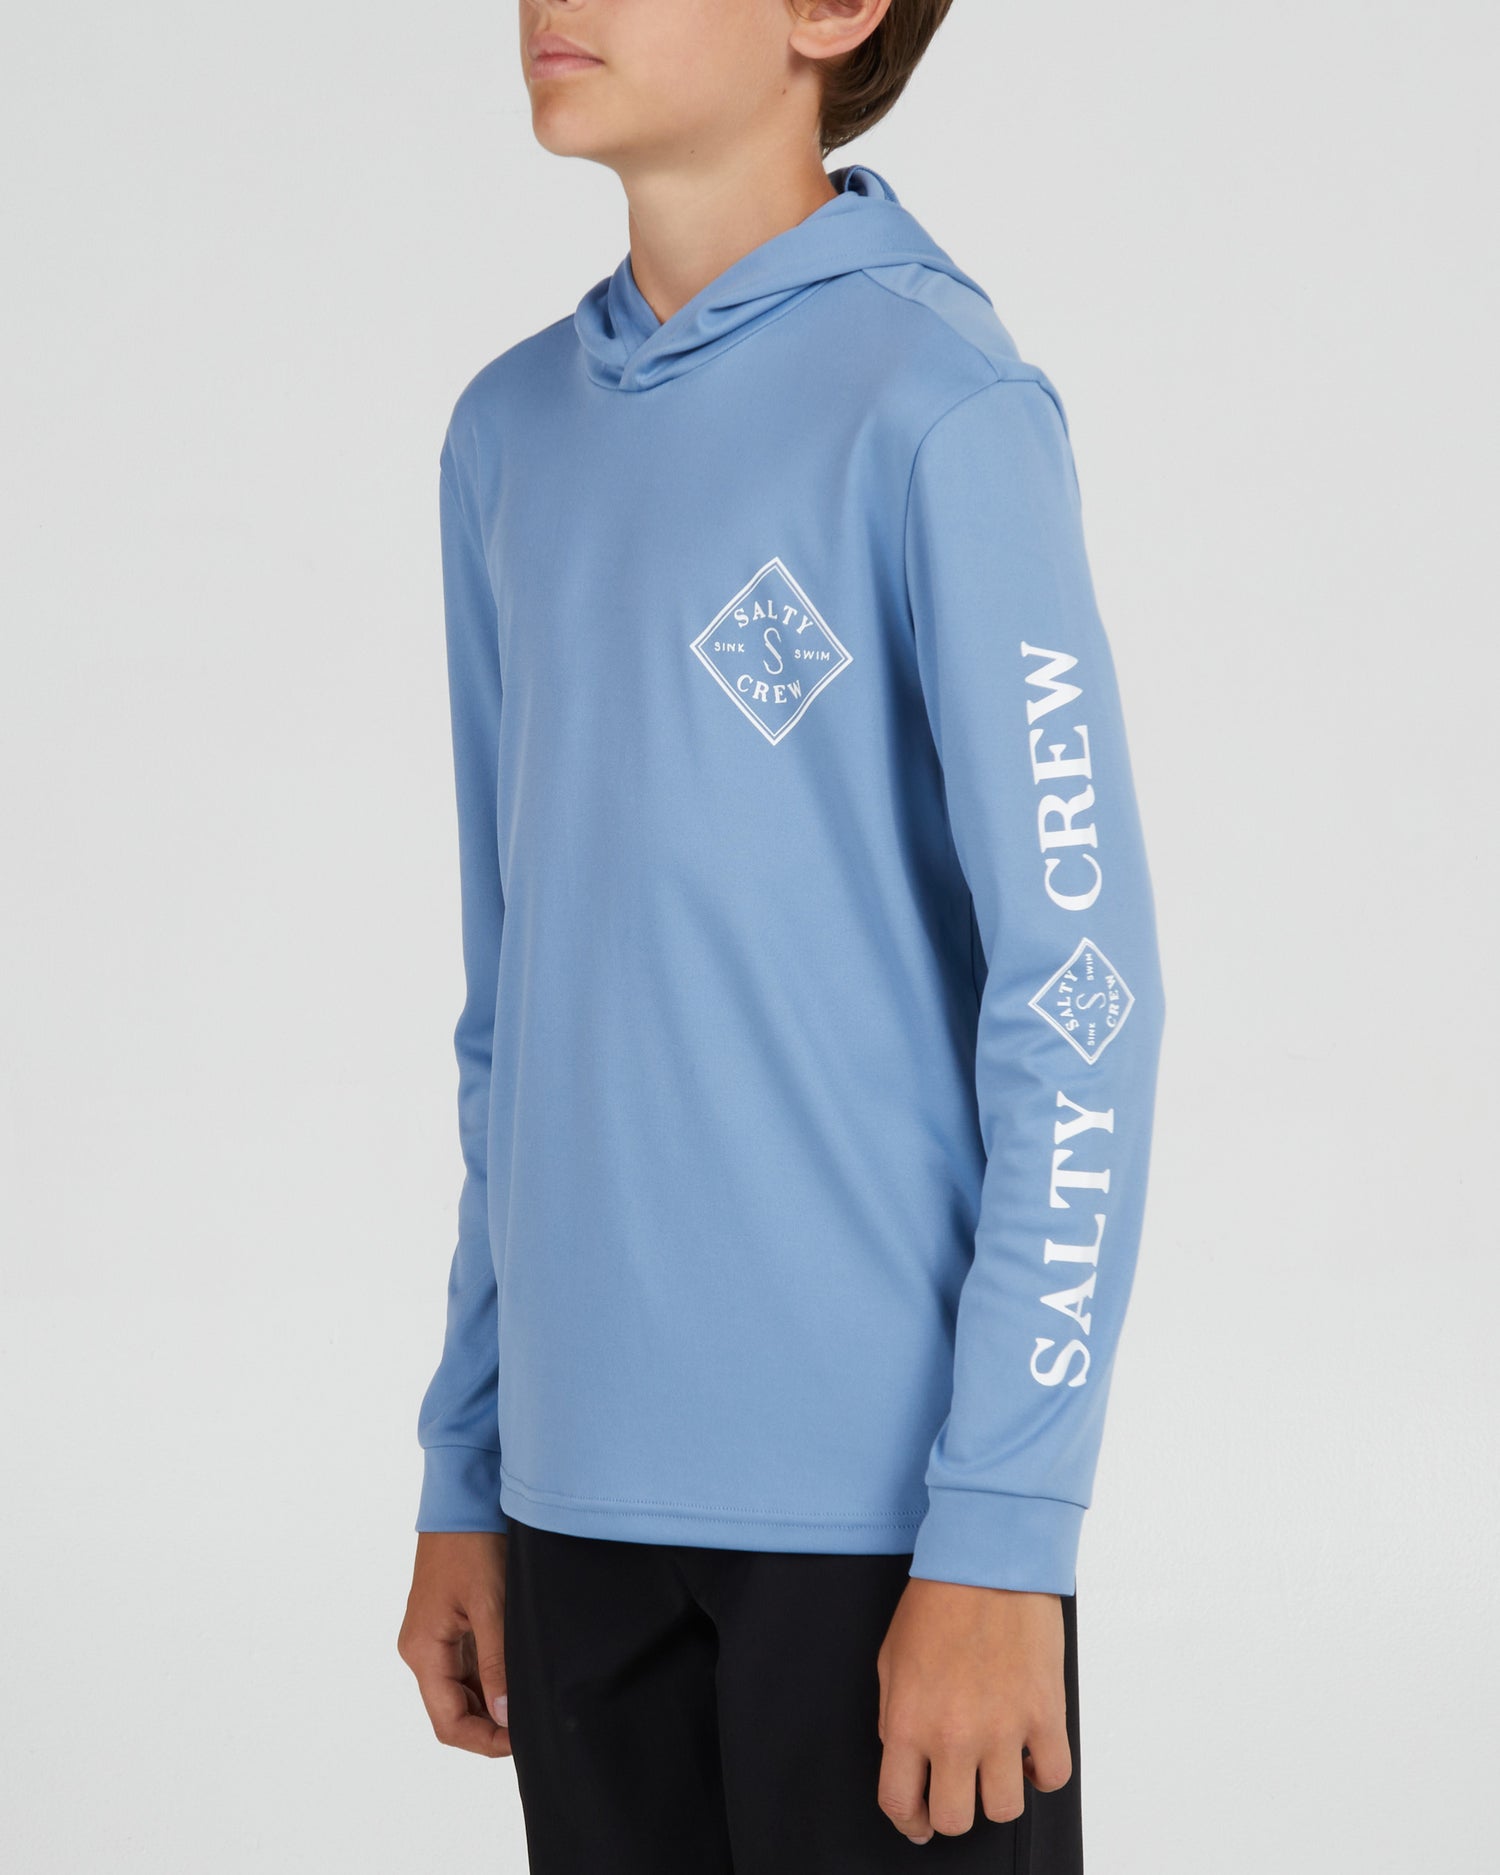 On body front angle of the Tippet Boys Marine Blue Hood Sunshirt